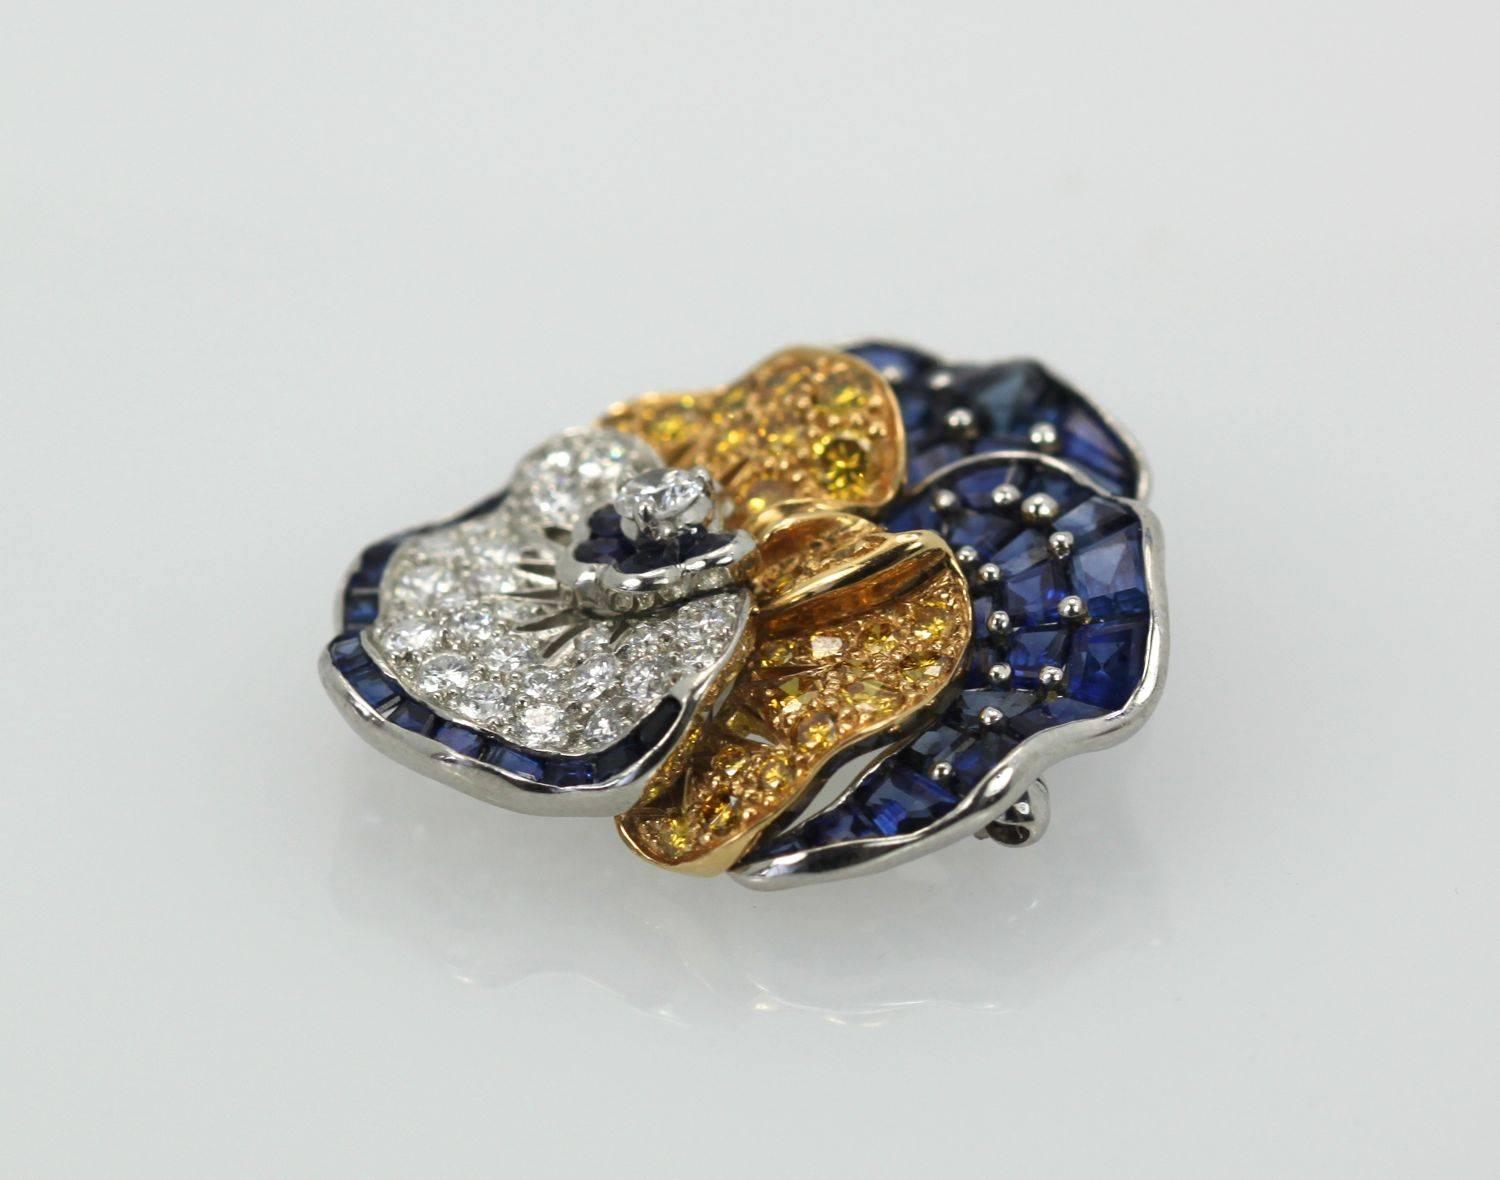 This Oscar Heyman Pansy is one of the most coveted brooches to own.  It set with calibrated blue Sapphires brilliant cut, colorless Diamonds and brilliant cut treated yellow Diamonds.  It measures 36mm x 32mm and weighs 20 grams.  I suggest making a